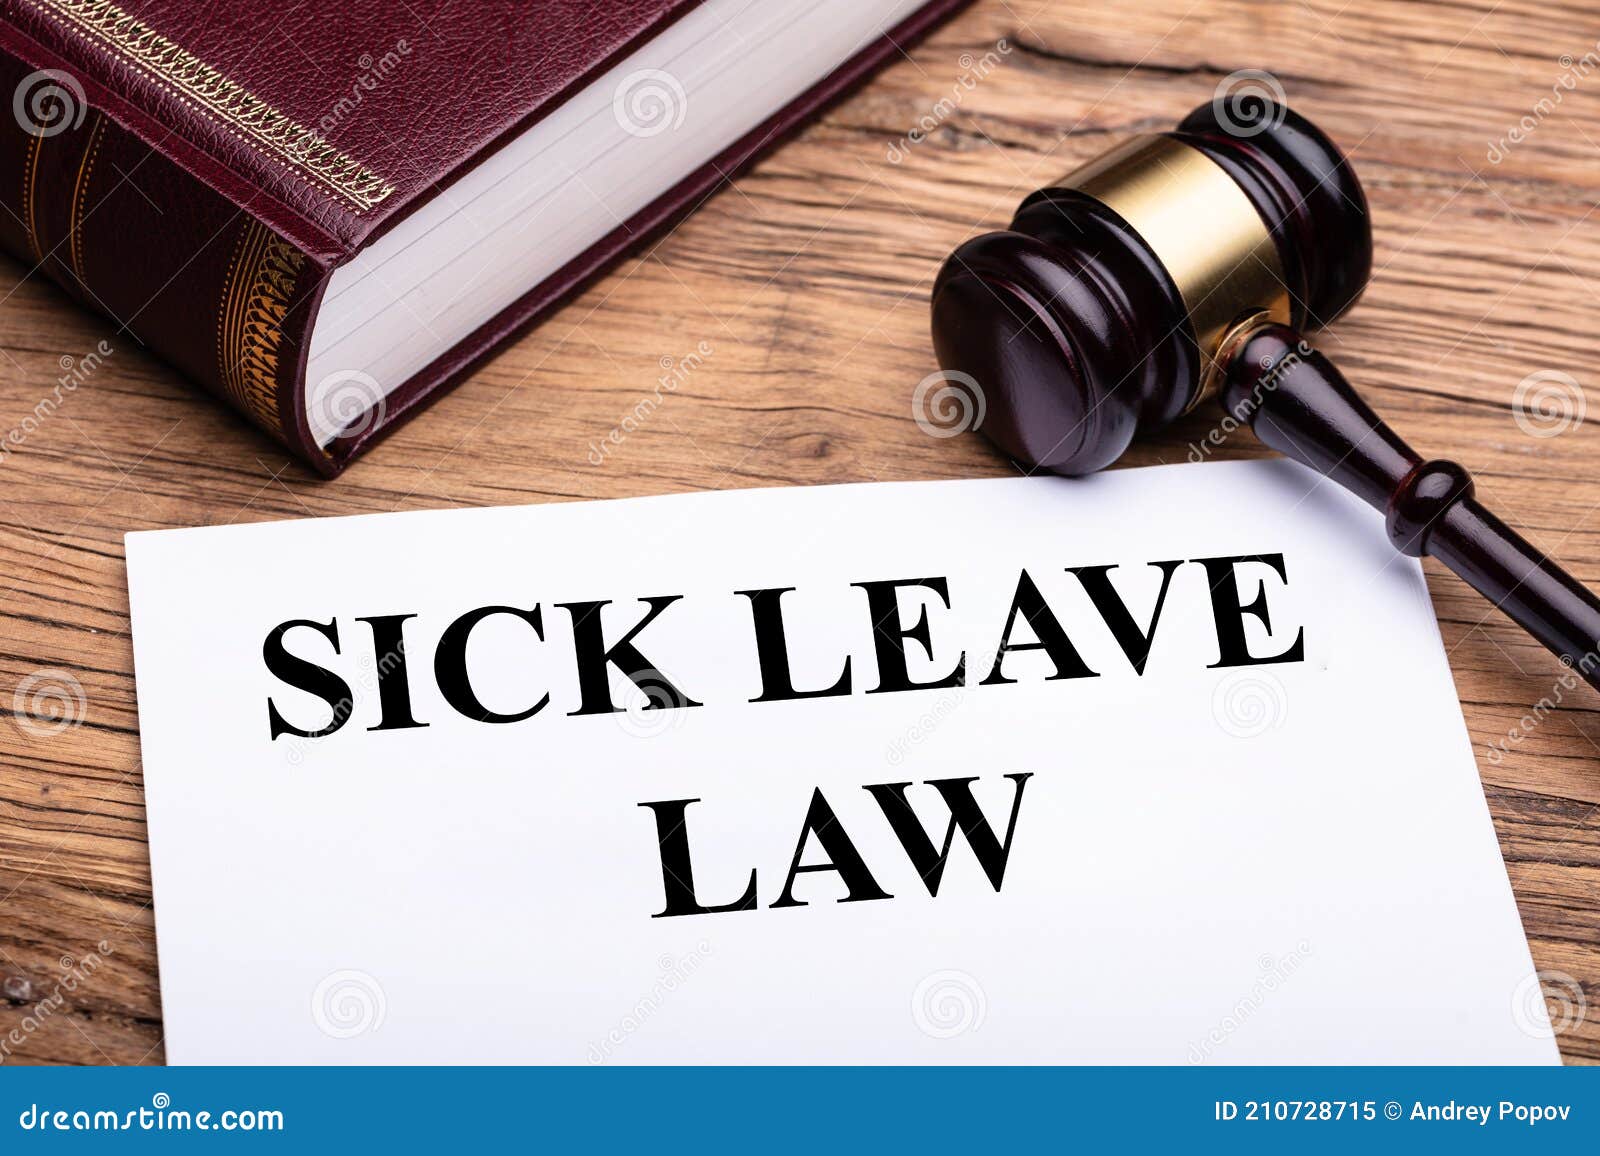 sick leave law documents with book and gavel